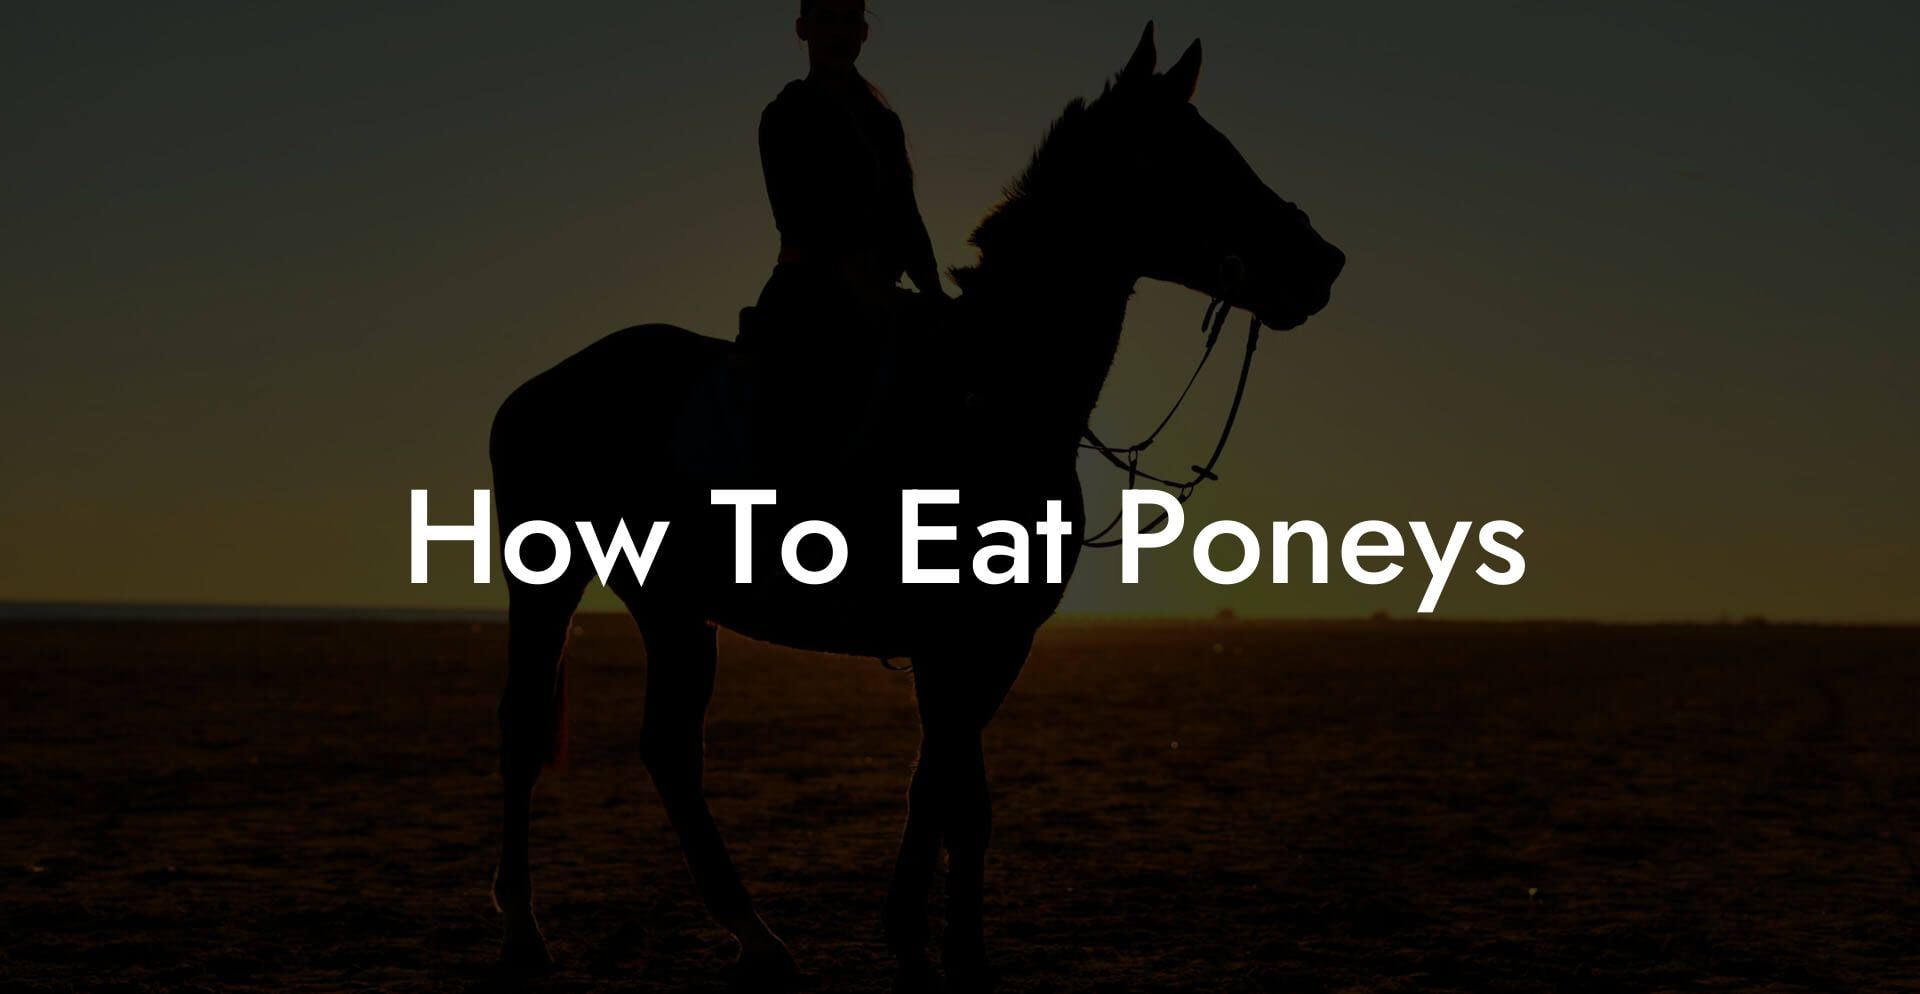 How To Eat Poneys